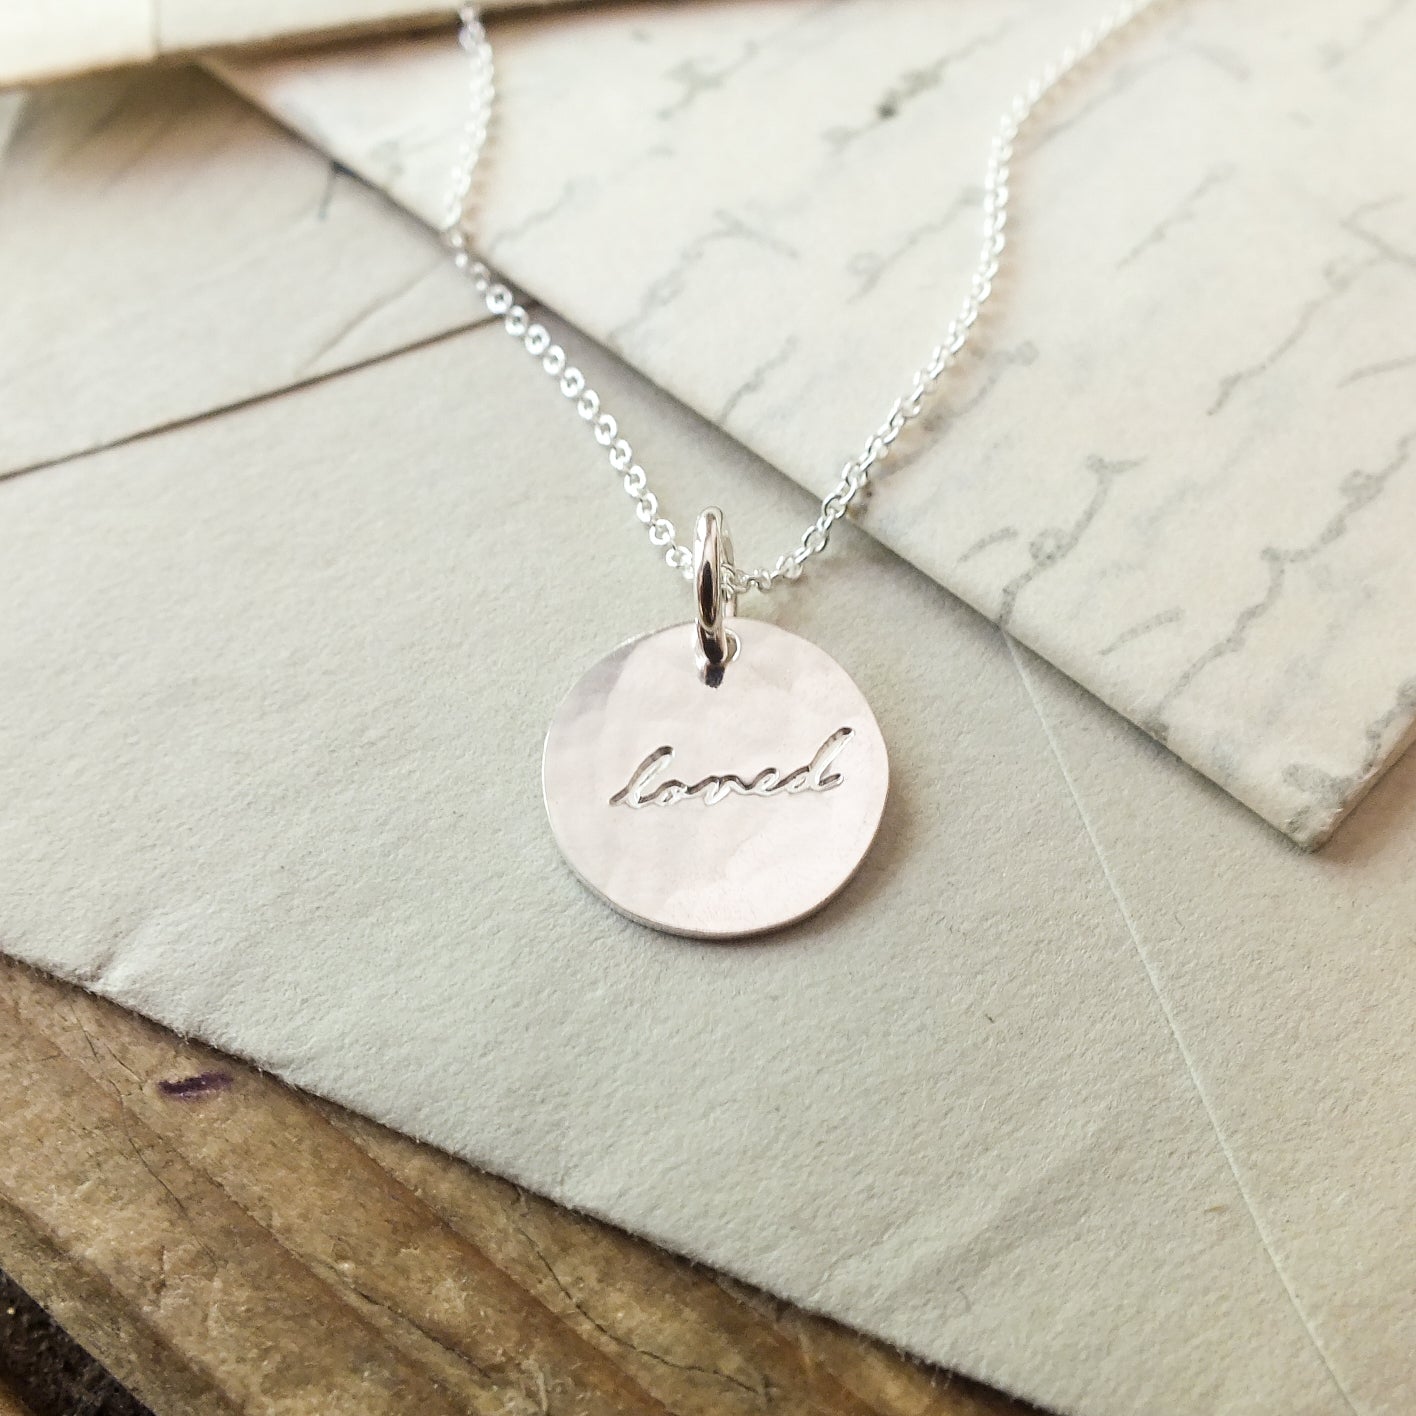 Becoming Jewelry&#39;s Loved Necklace with the word &quot;love&quot; inscribed, resting on an envelope.